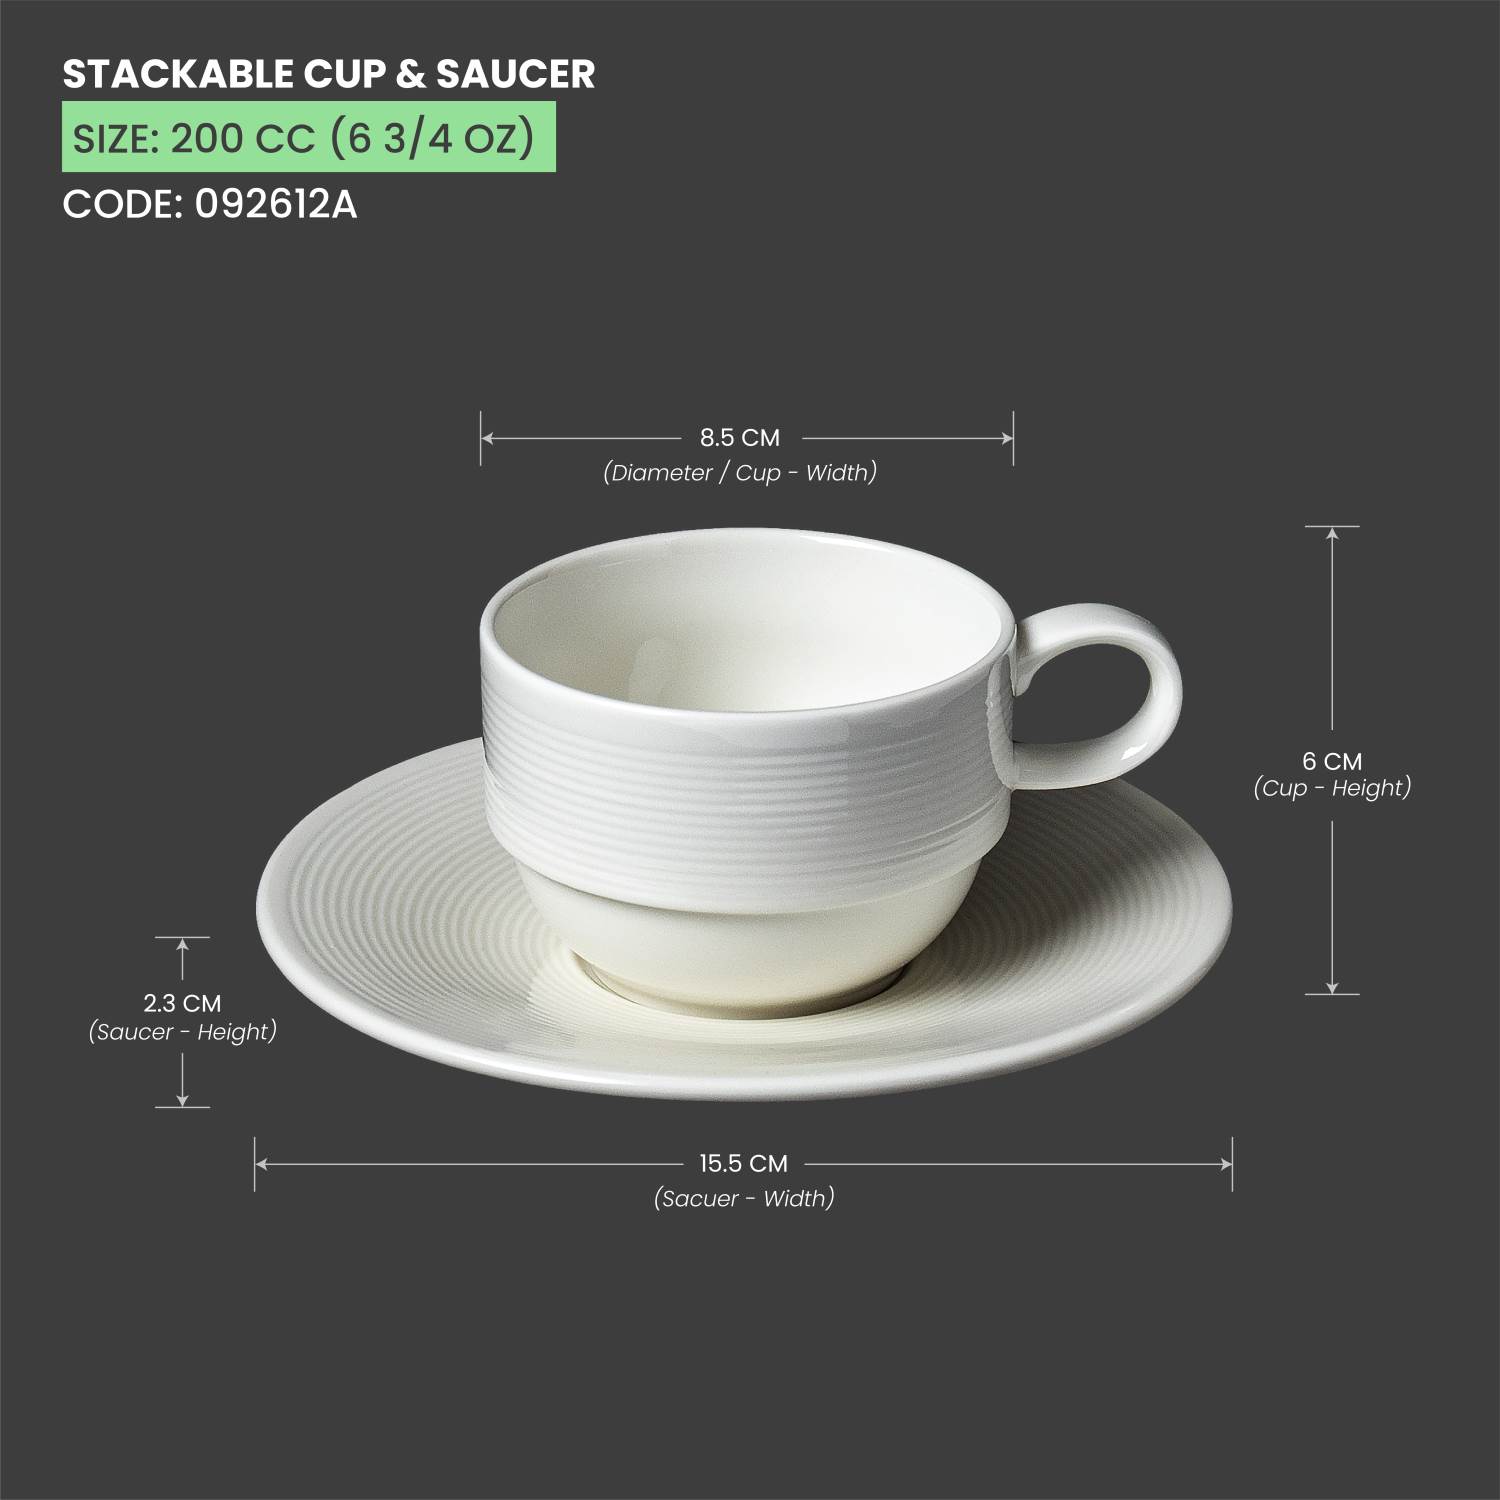 Baralee Wish Stackable Cup 200 Cc (6 3/4 Oz)